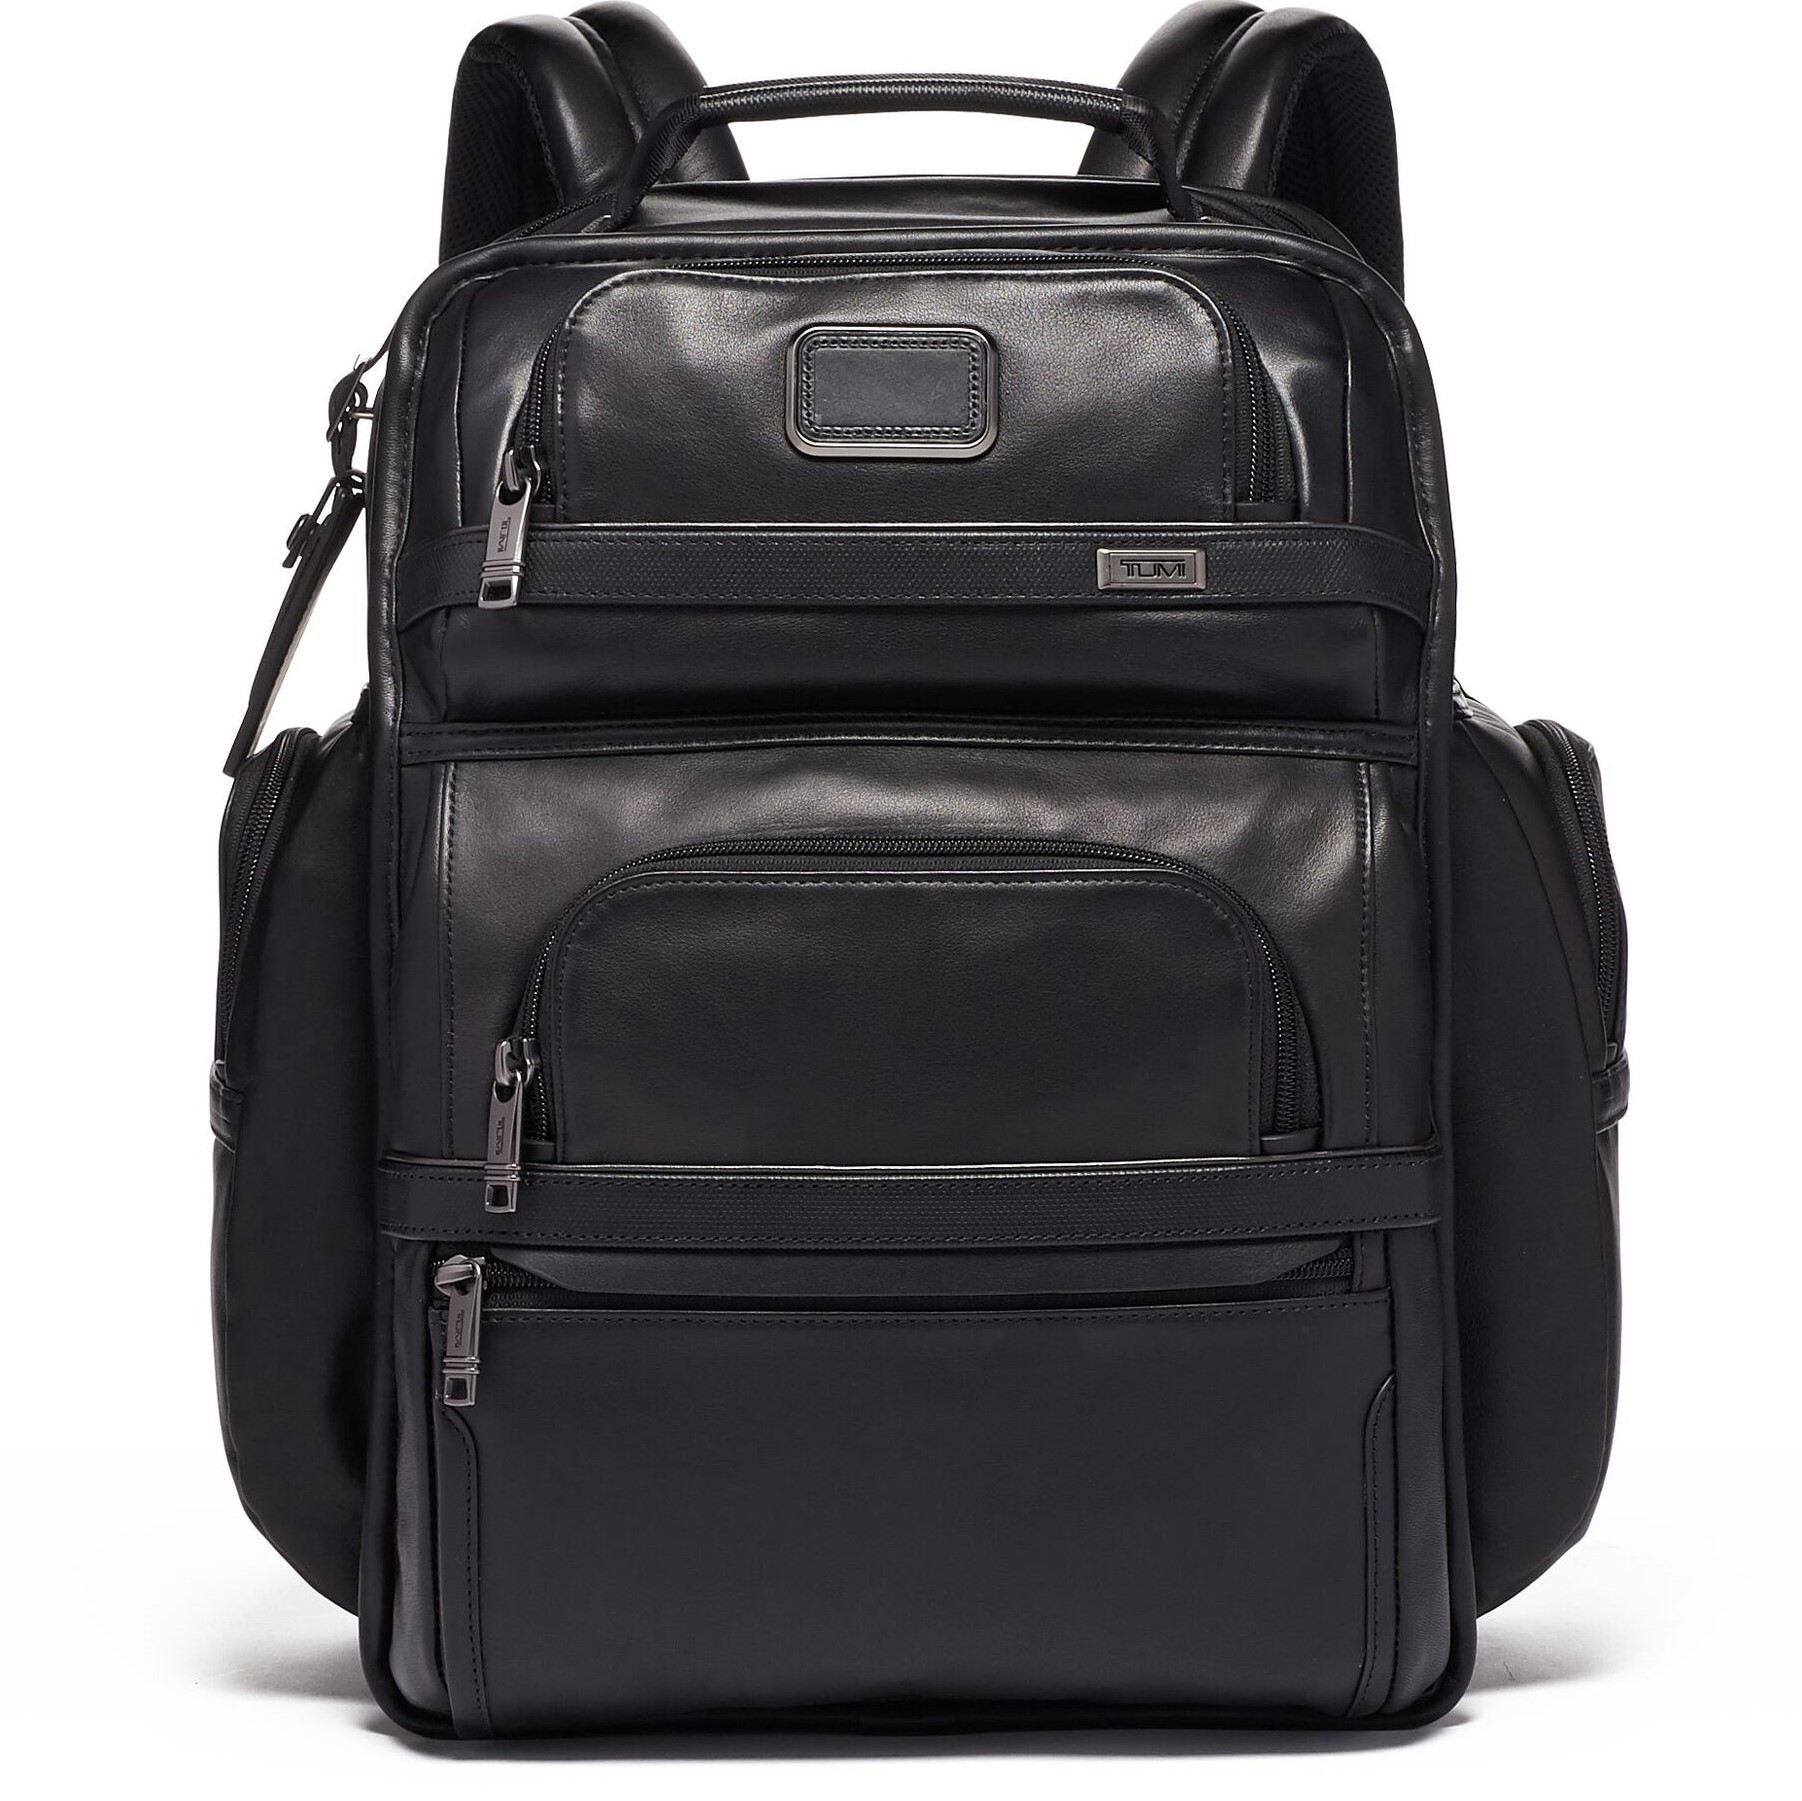 BALO DA NAM TUMI ALPHA 3 T-PASS BUSINESS CLASS BRIEF PACK LEATHER BACKPACK 1